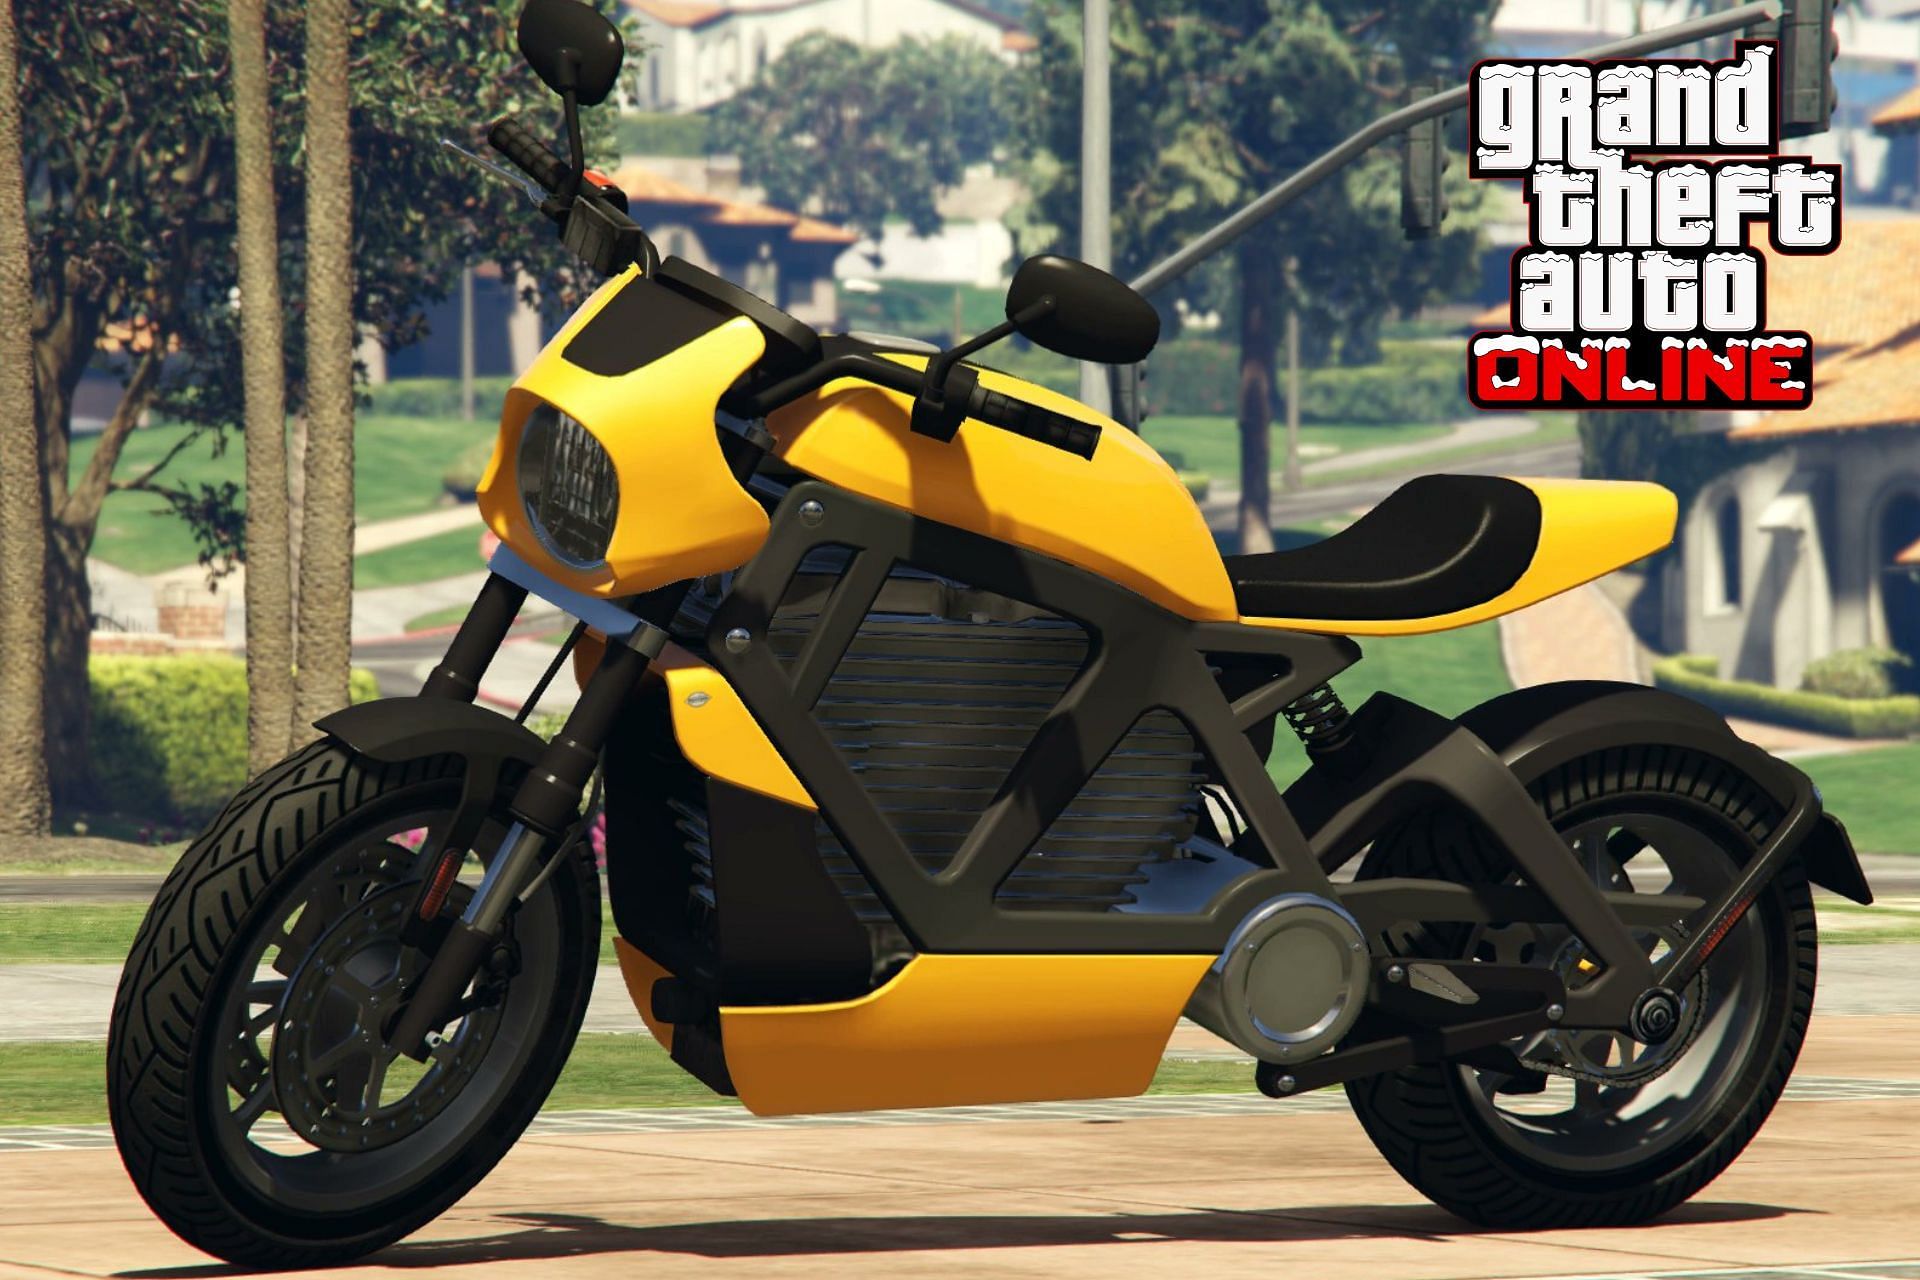 Gta Online Launches New Western Powersurge Bike With New Year Weekly Update  (December 29, 2022)